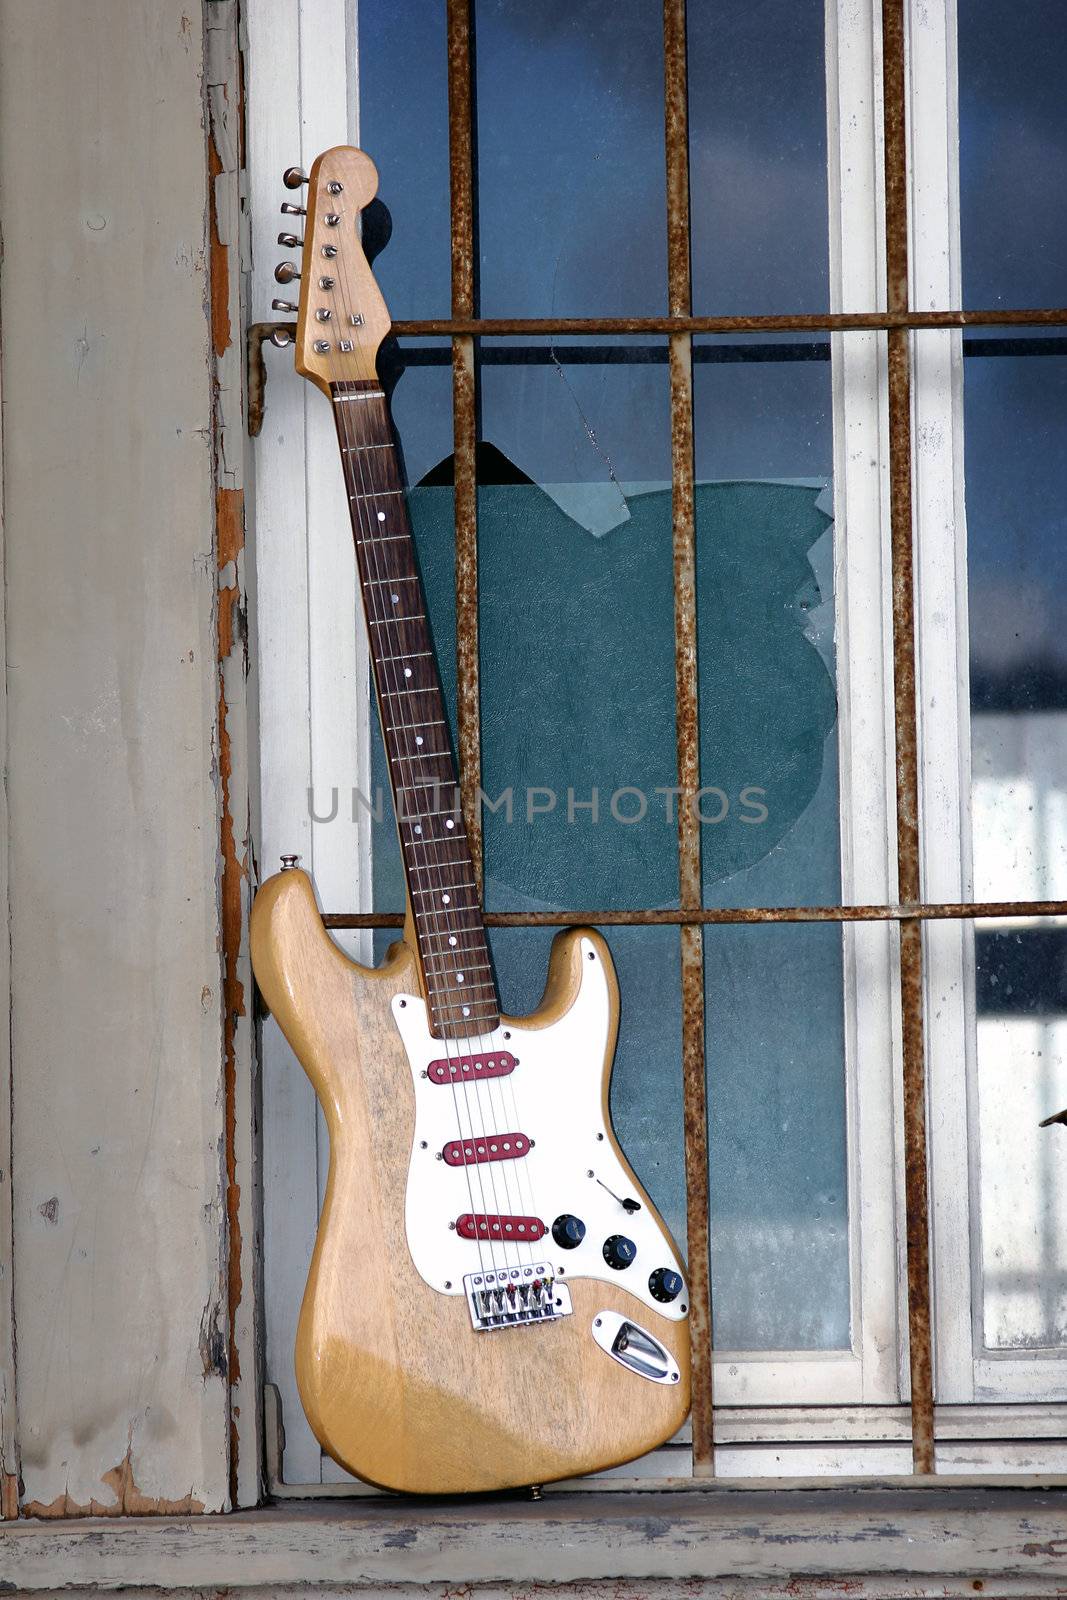 the old wooden guitar in the window